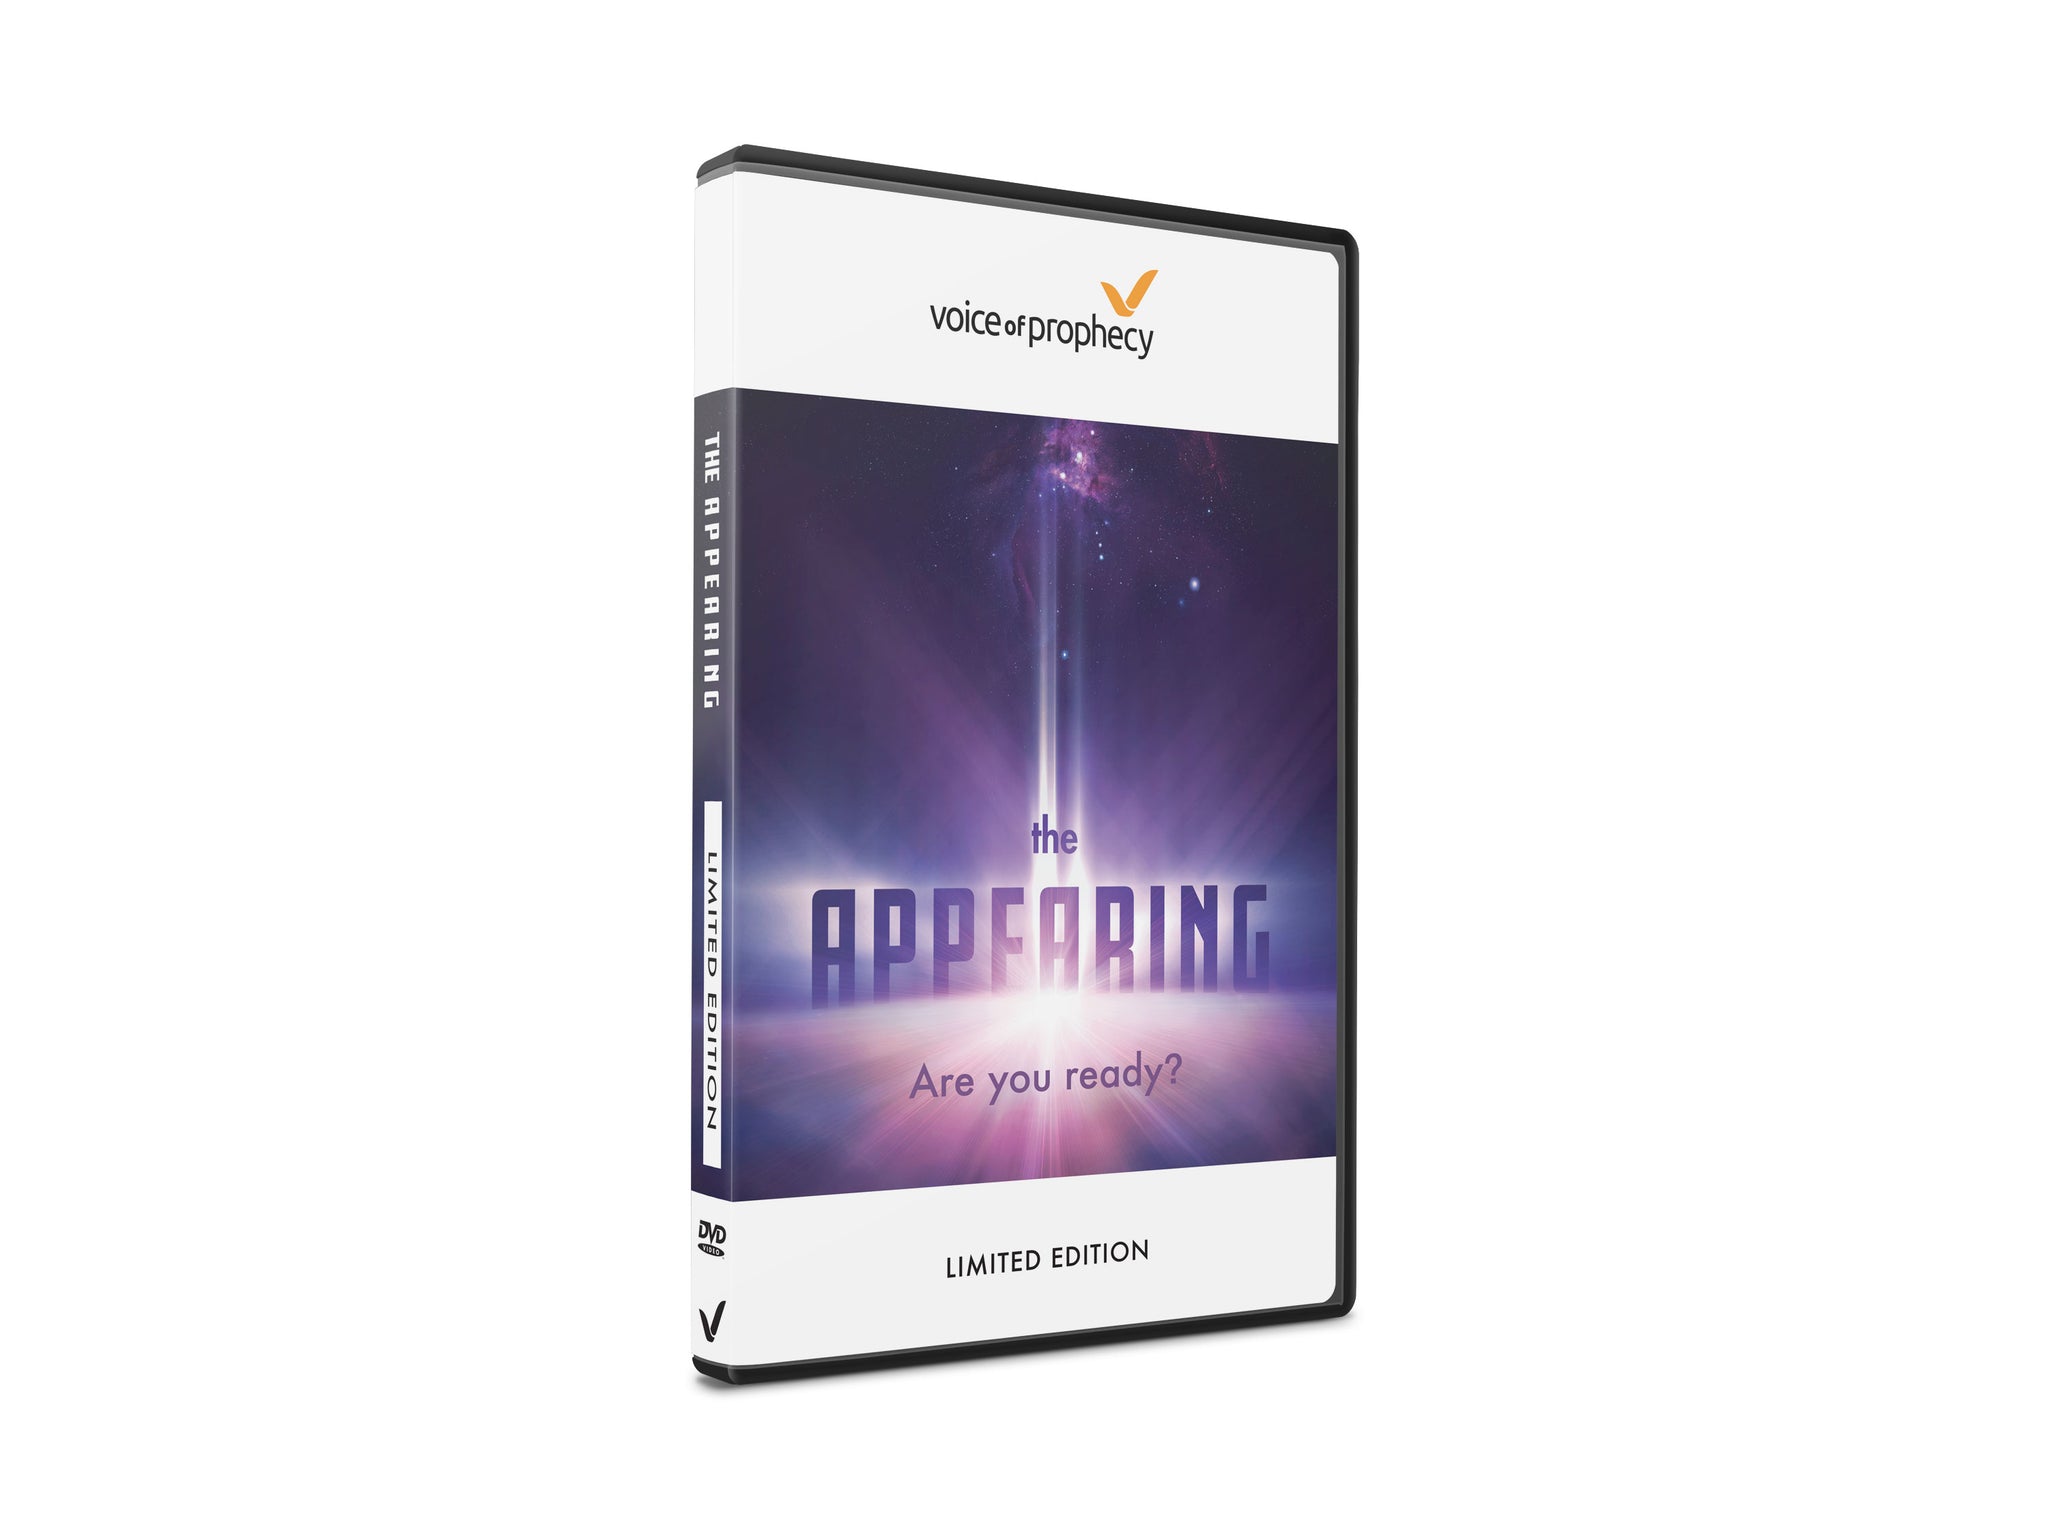 The Appearing DVD